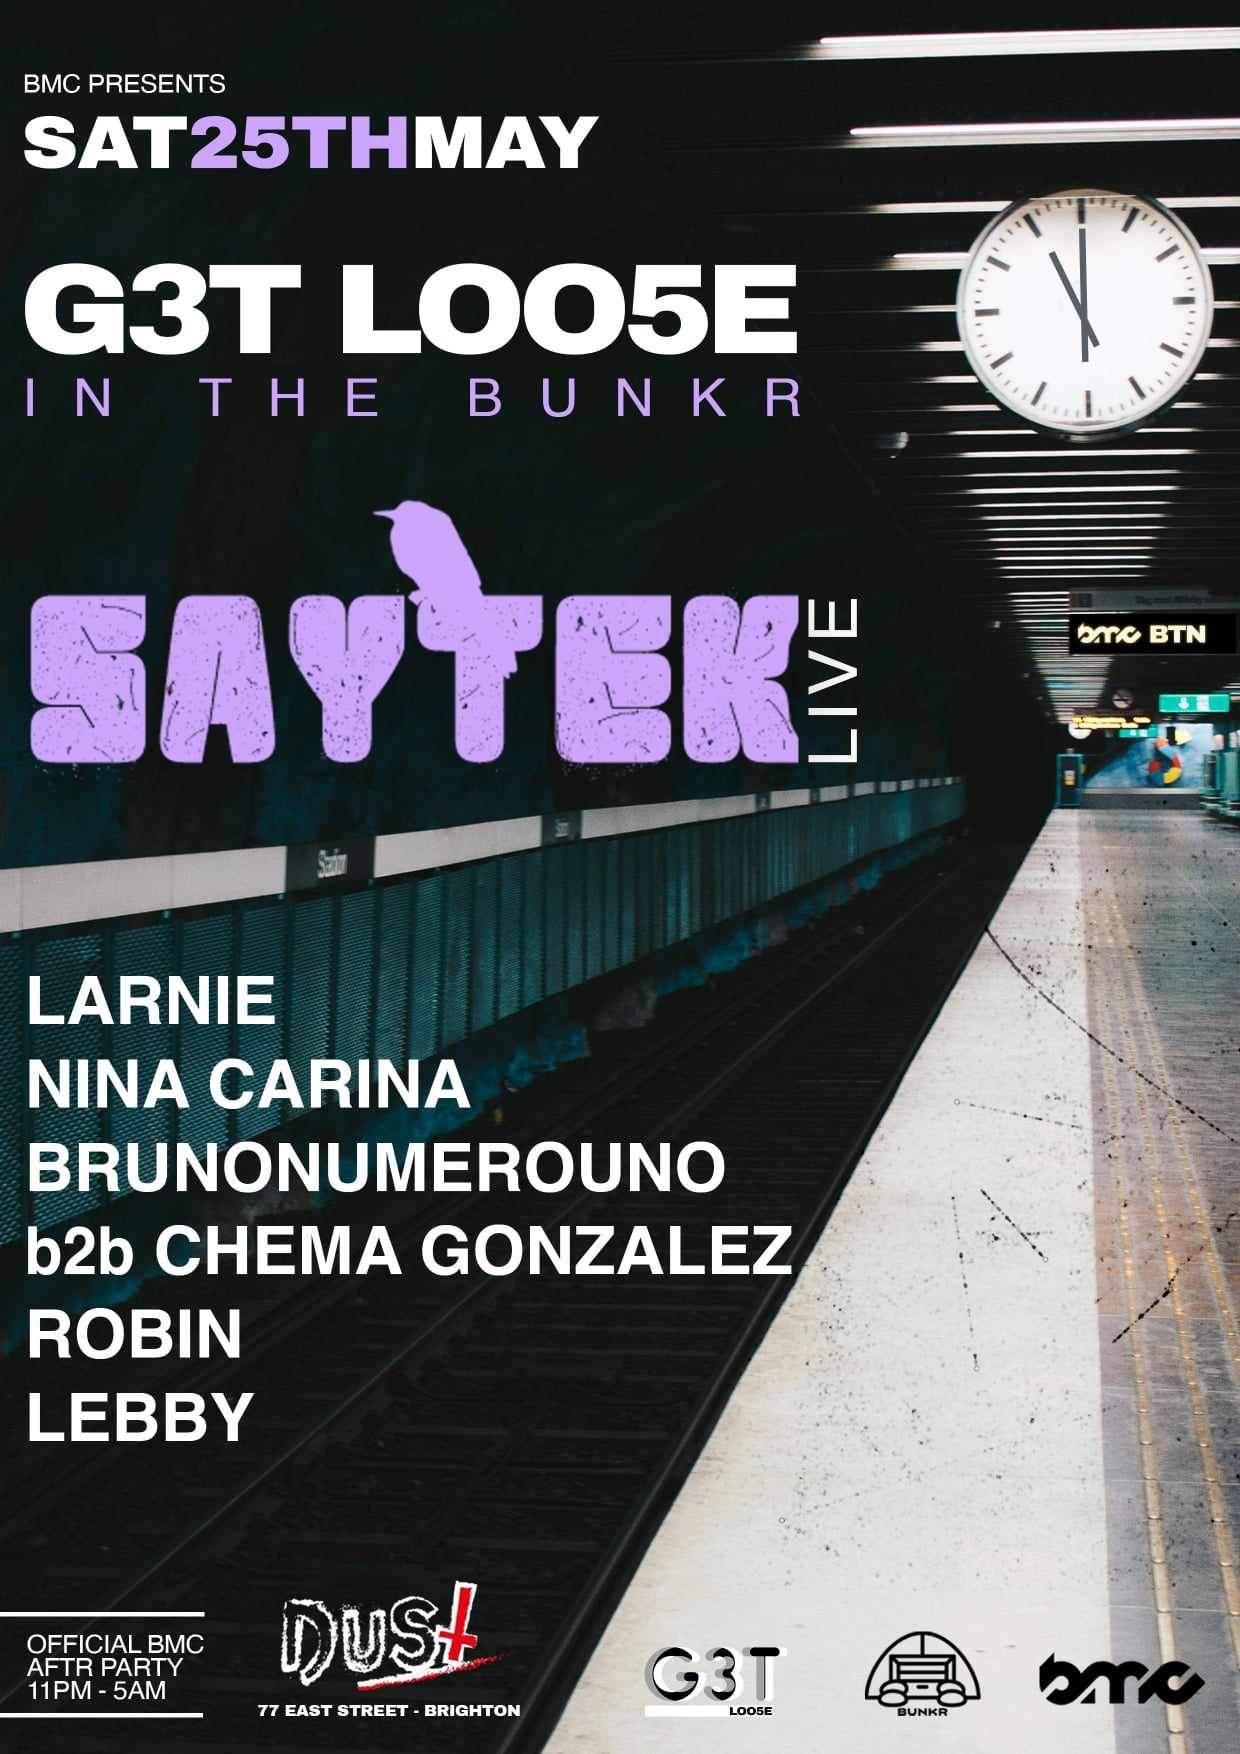 BMC presents - G3T LOO5E in the Bunkr with Saytek Live - フライヤー表